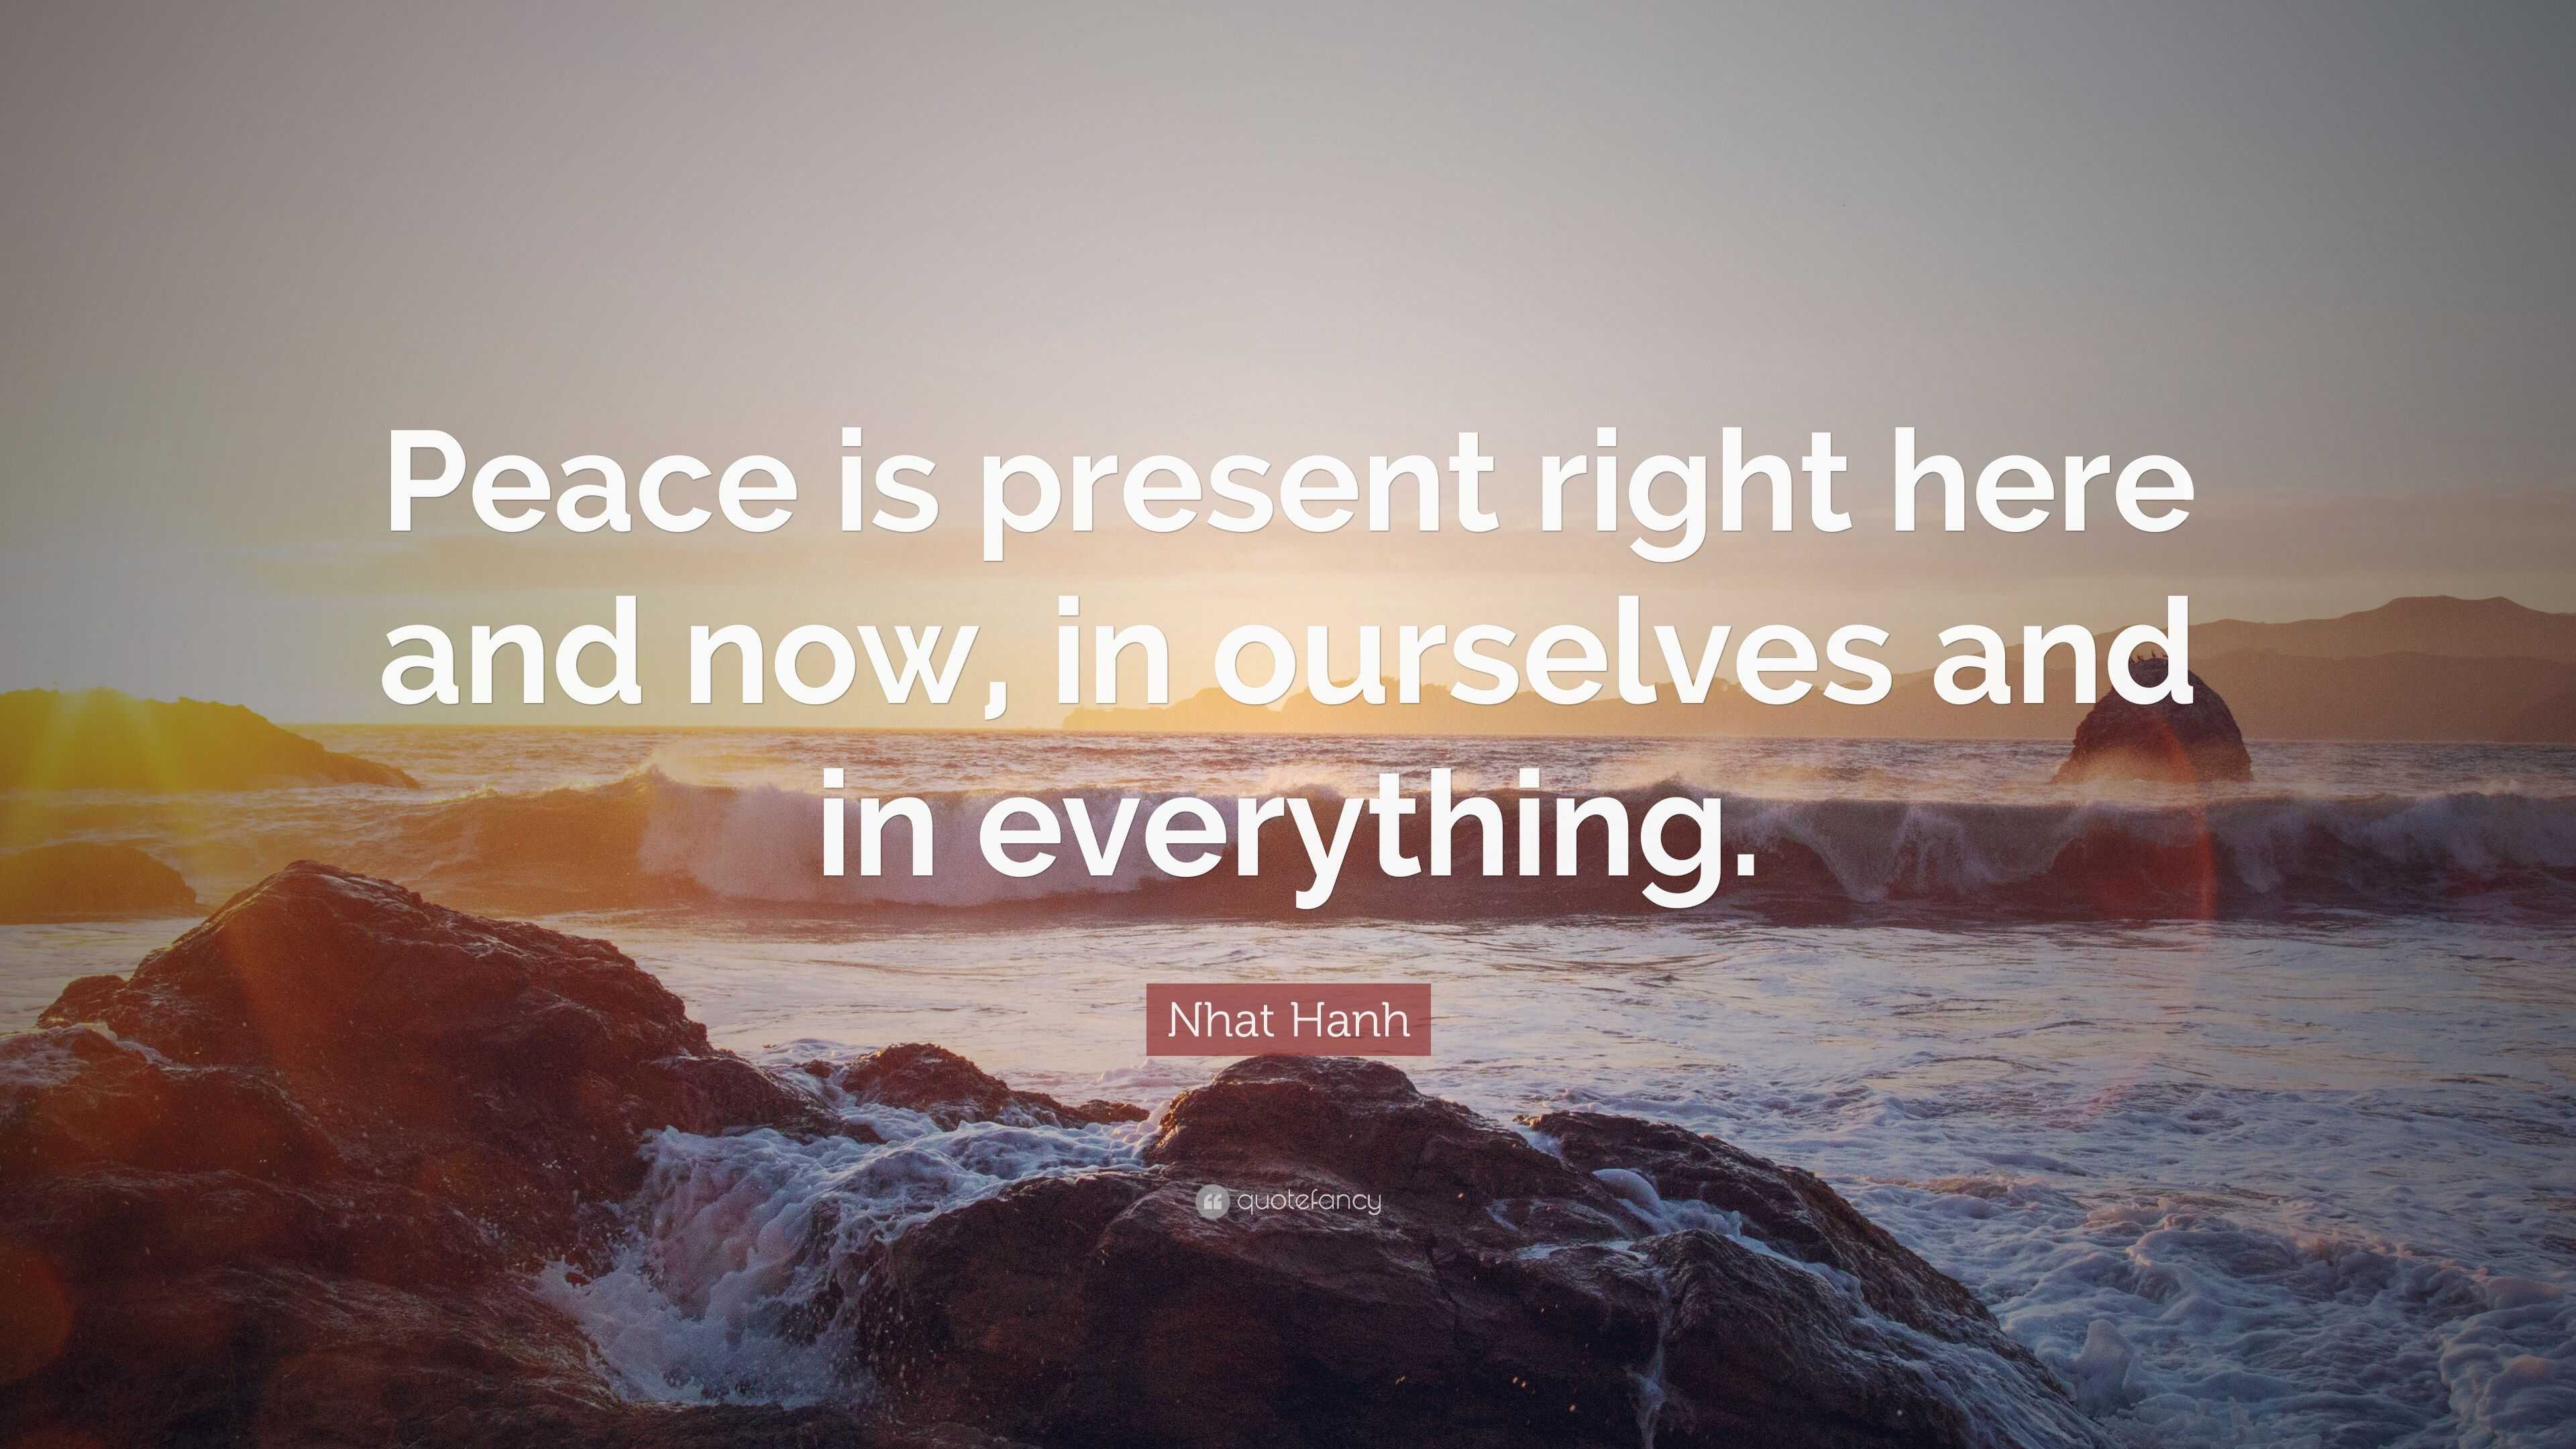 Nhat Hanh Quote: “Peace is present right here and now, in ourselves and ...